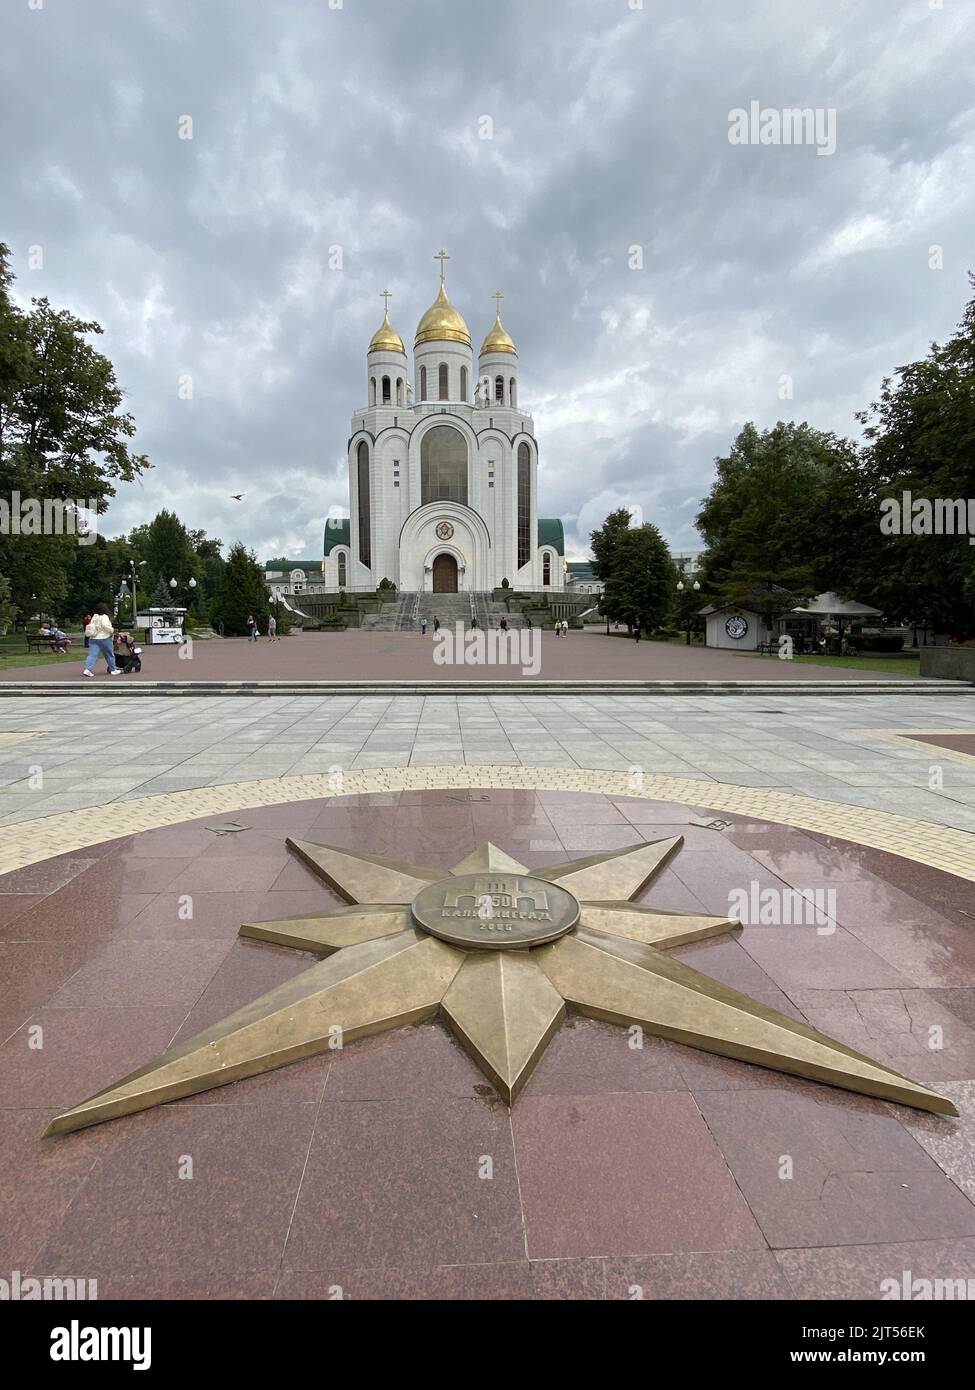 Kaliningrad, Russia. 18th July, 2022. A star on the ground in Victory Square in front of a Russian Orthodox church commemorates the 750th anniversary of the city once called Königsberg in Russia's Baltic Sea exclave of Kaliningrad. (to 'Baltic Sea exclave Kaliningrad continues to complain about sanctions pressure - and threatens') Credit: Ulf Mauder/dpa/Alamy Live News Stock Photo